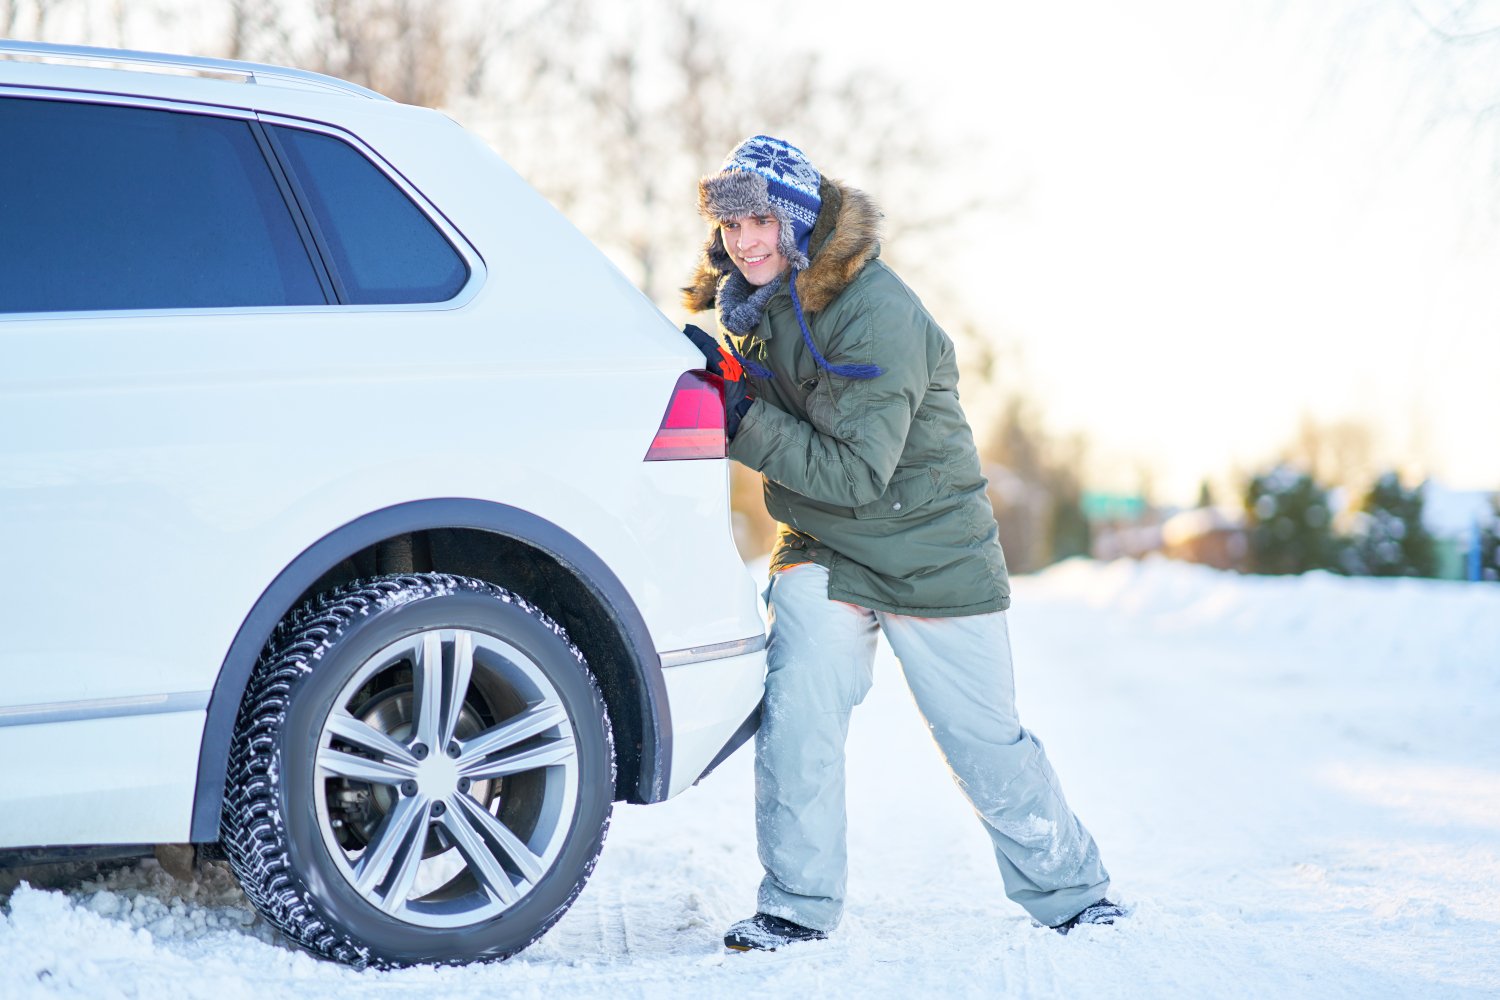 Emergency Towing in Winter: Why You Need a Cold-Weather Towing Plan